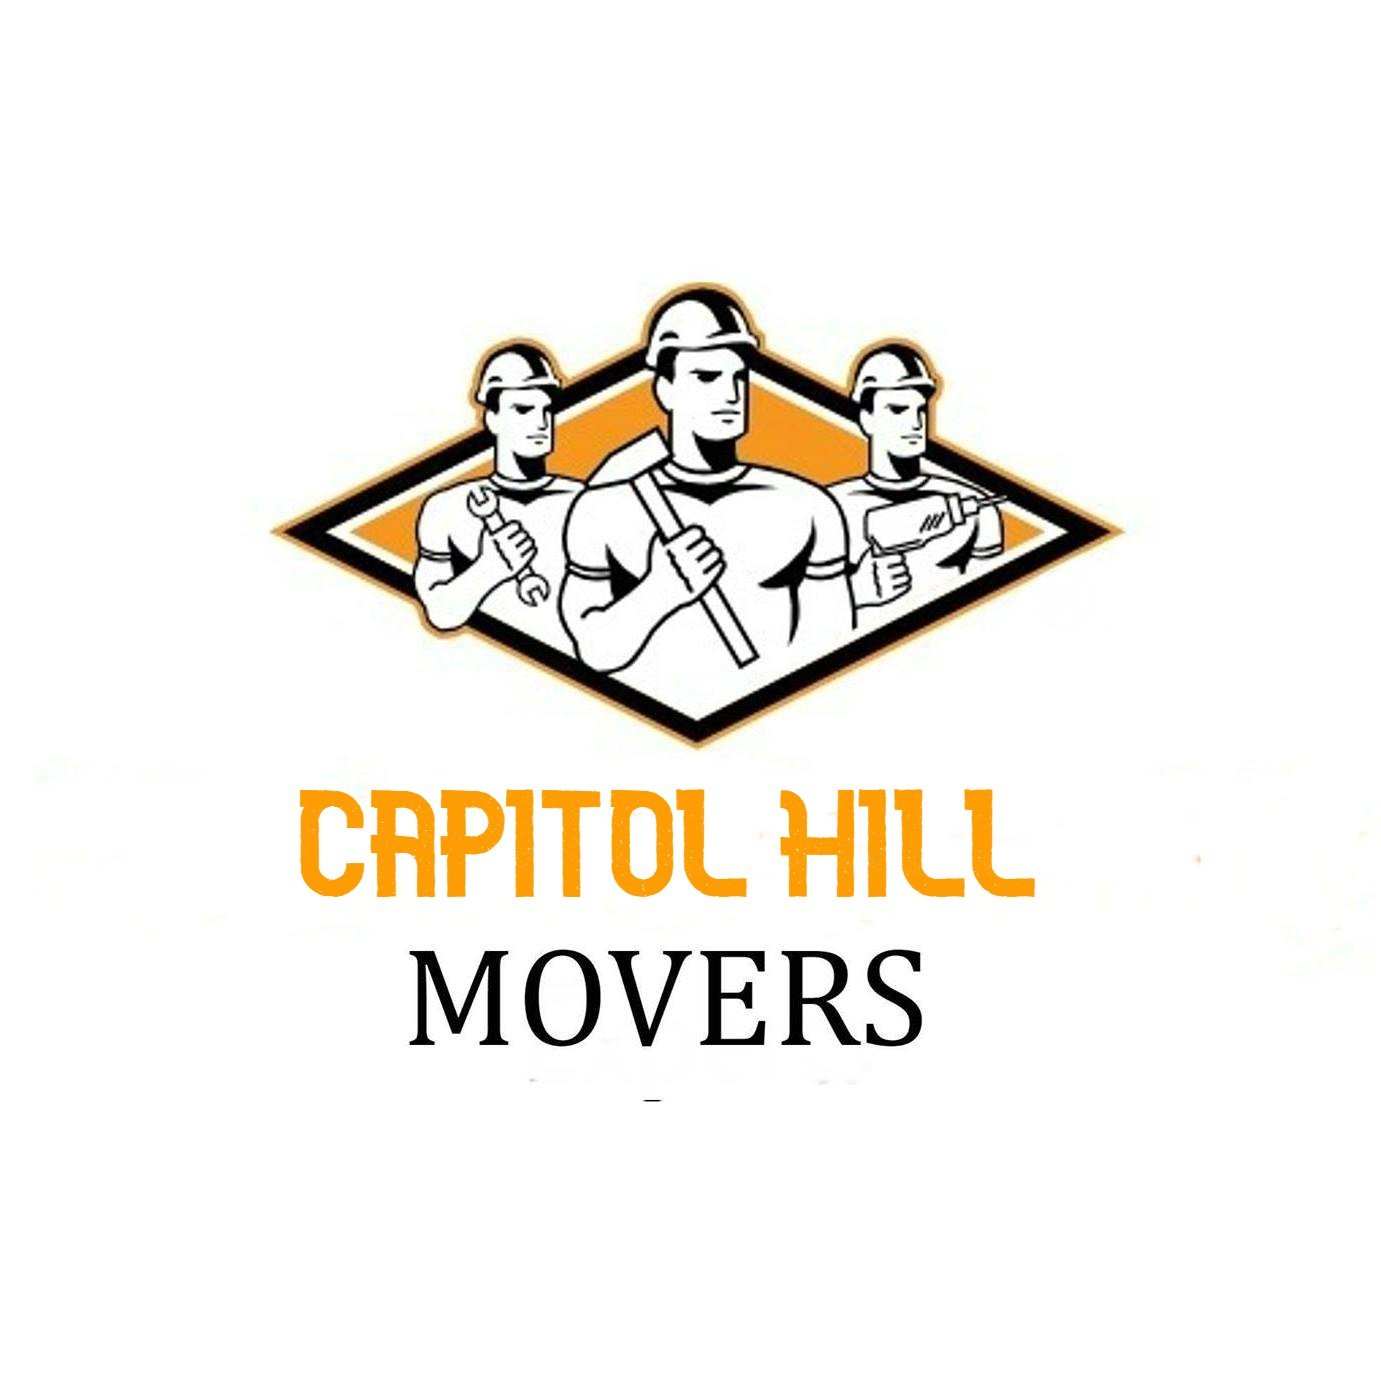 Capitol hill movers